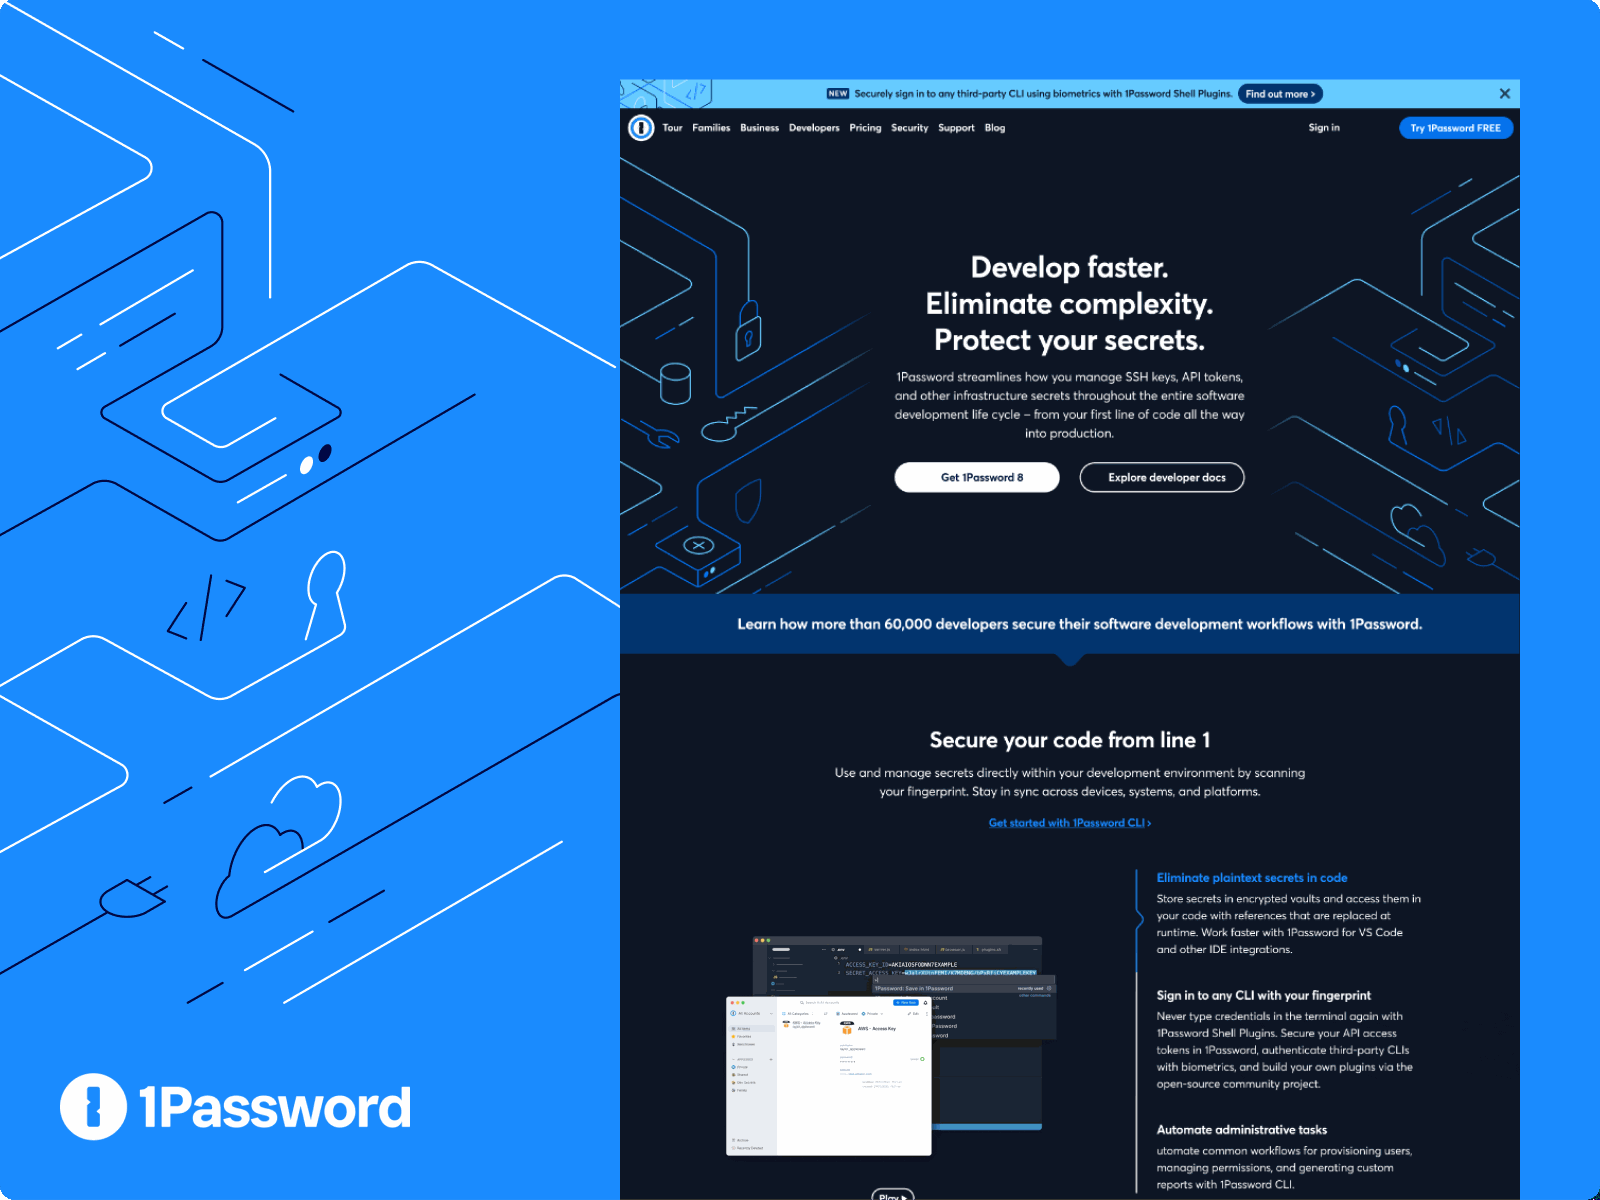 1Password Software Development Life Cycle after effects figma illustration landing page marketing motion graphics ui design ux design visual design visual identity web design